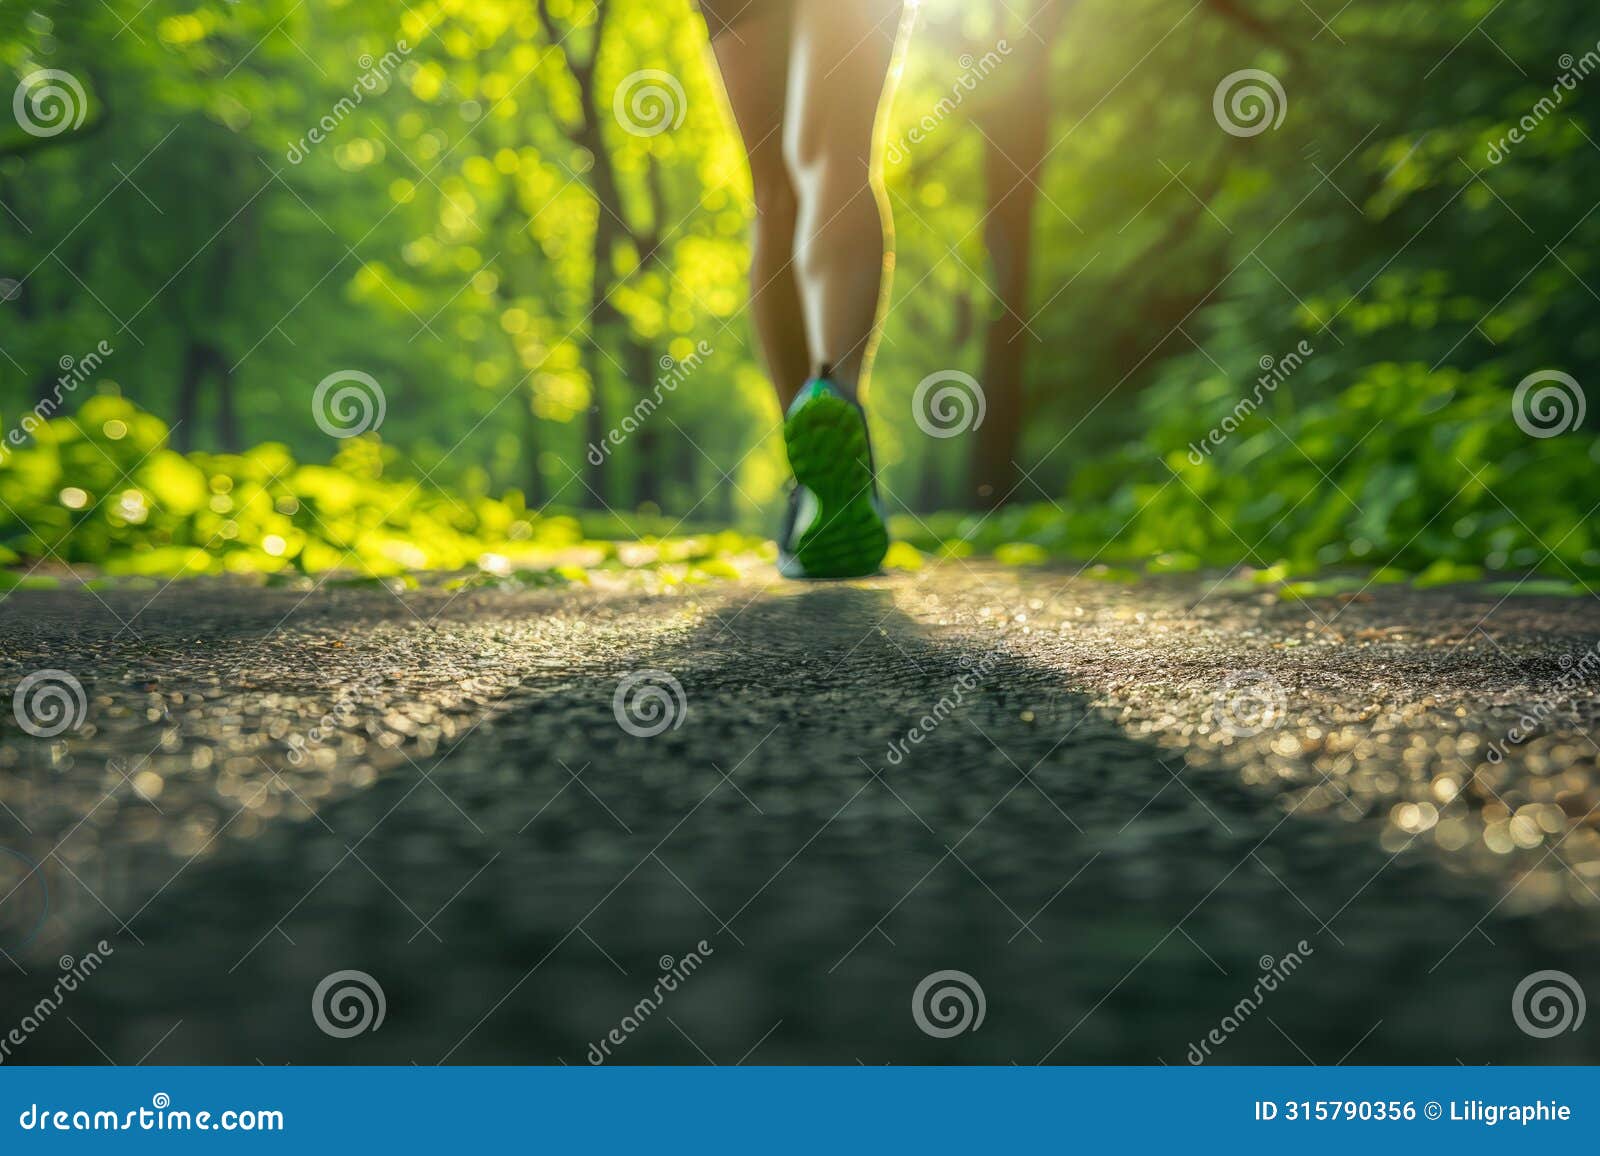 blurred background with person jogging in sunlit park. concept healthy lifestyle and outdoor exercise. selective focus